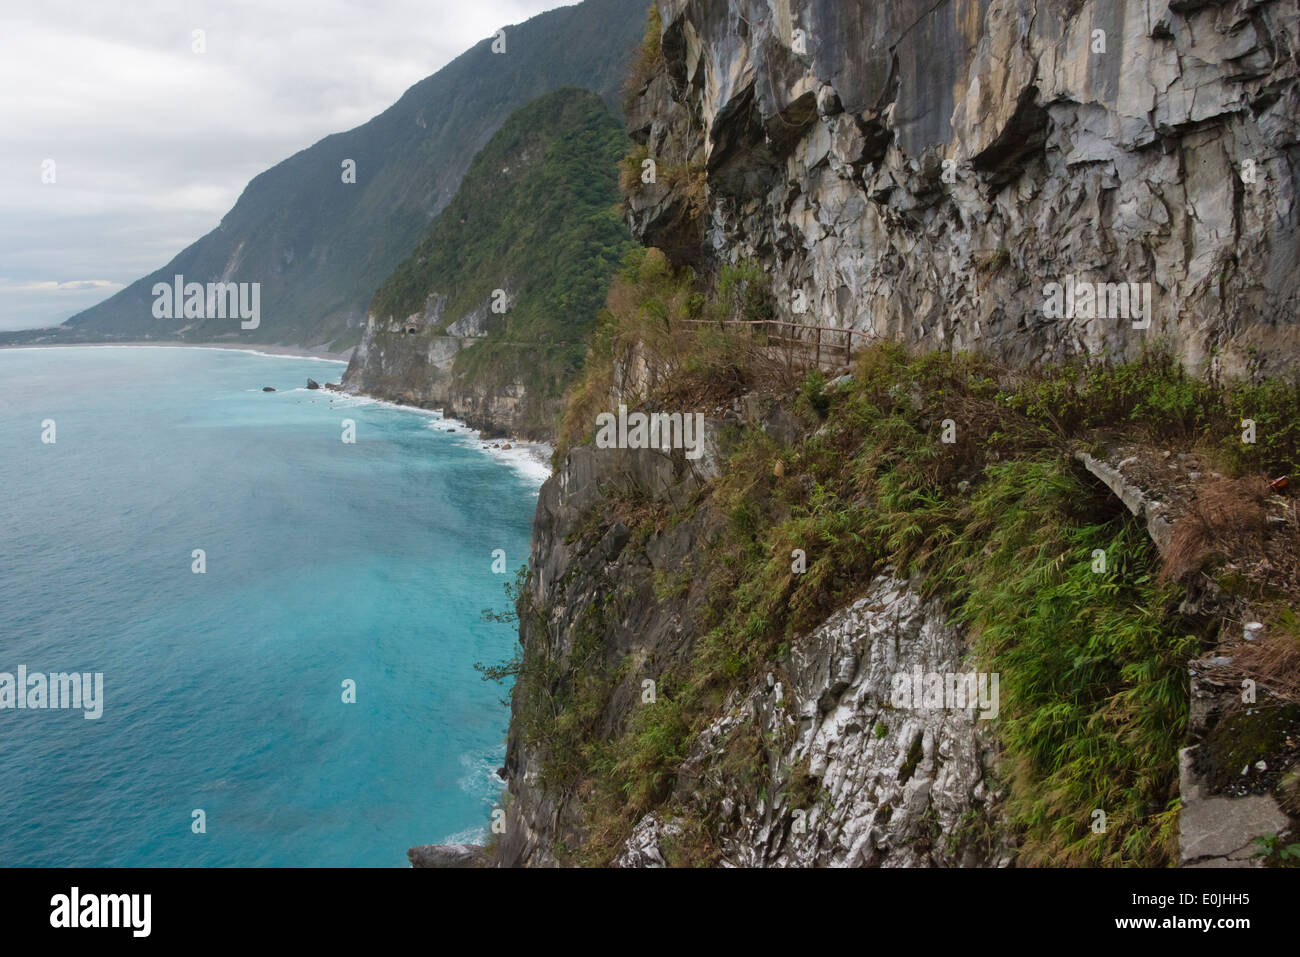 Cliff with a road built in along the east coast, Taiwan Stock Photo